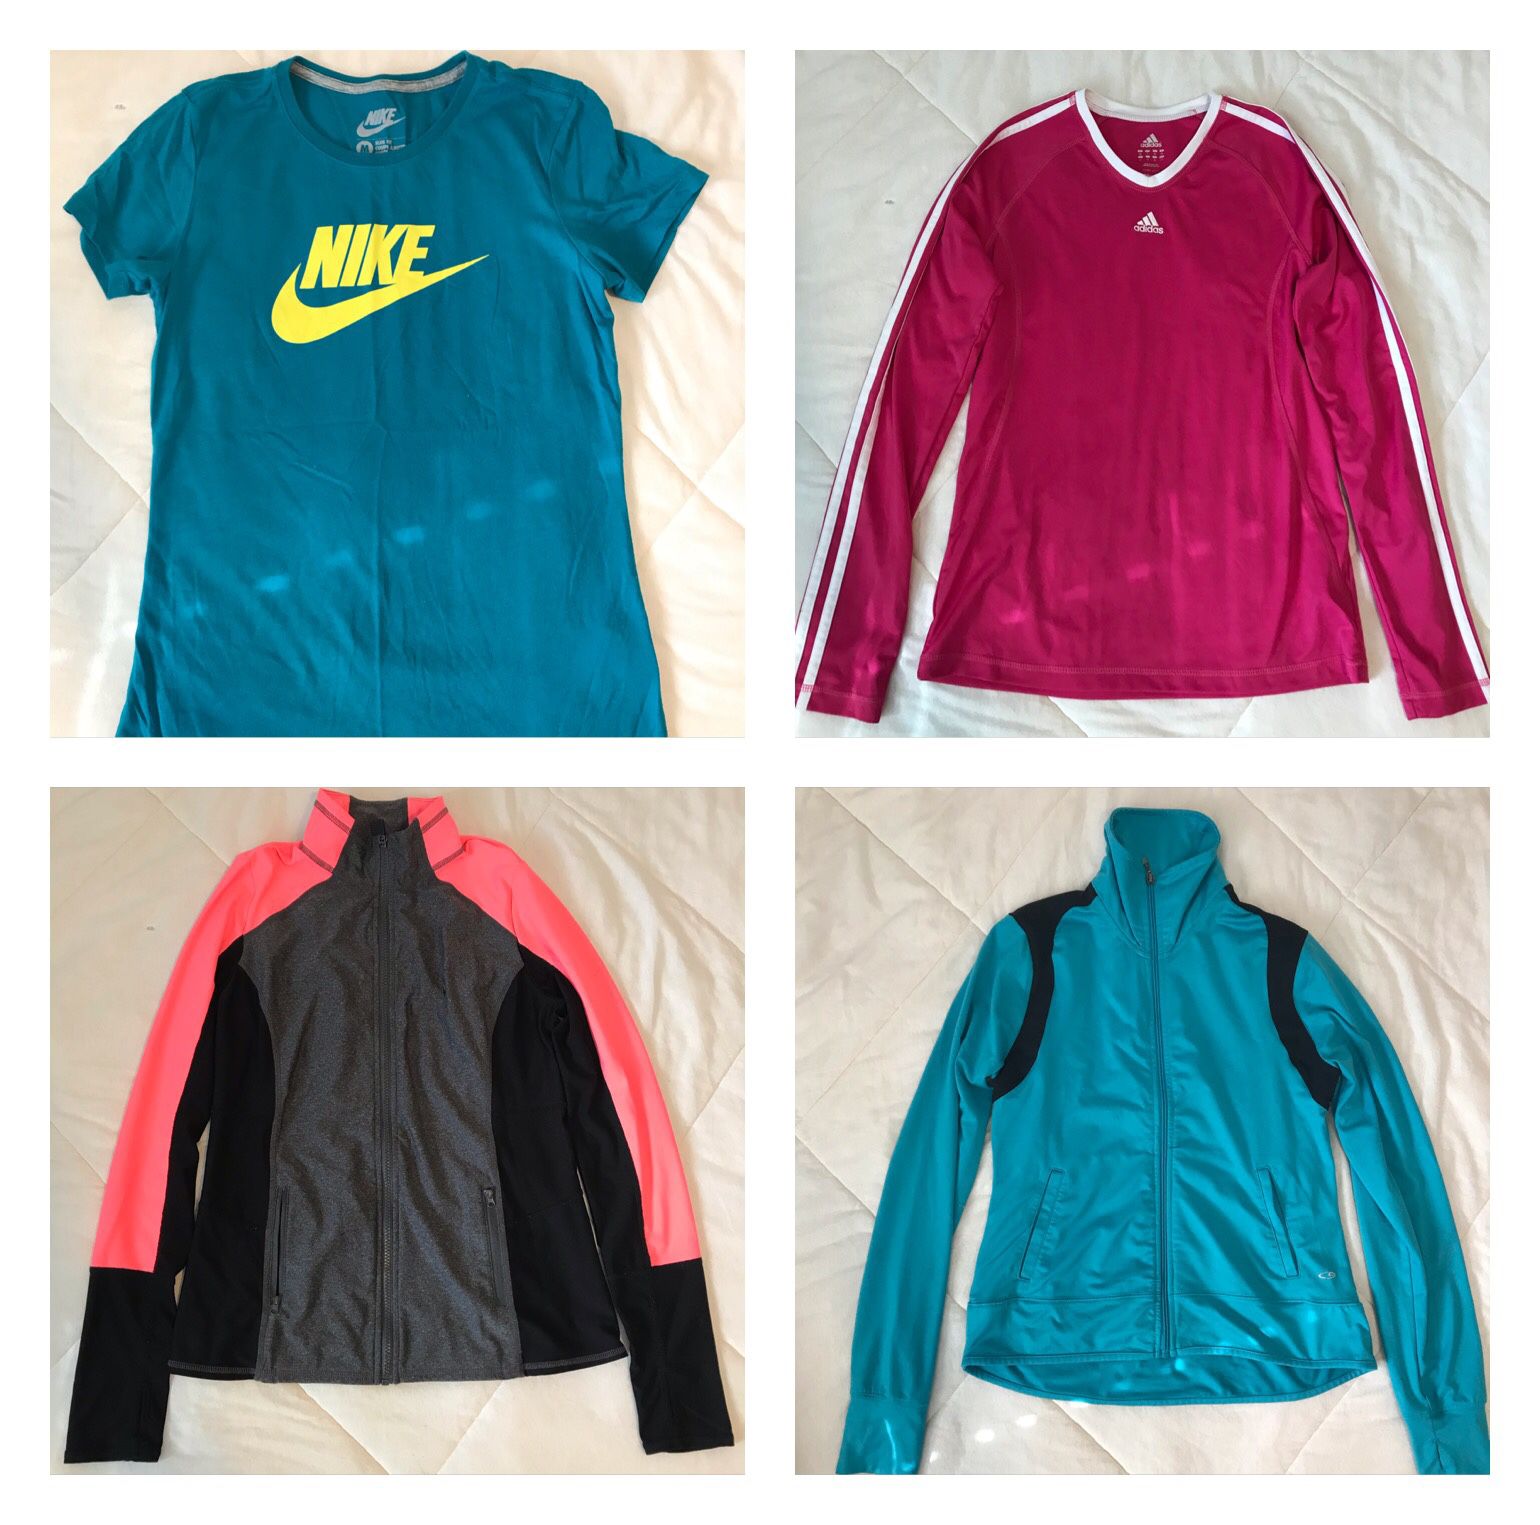 Women’s athletic clothes